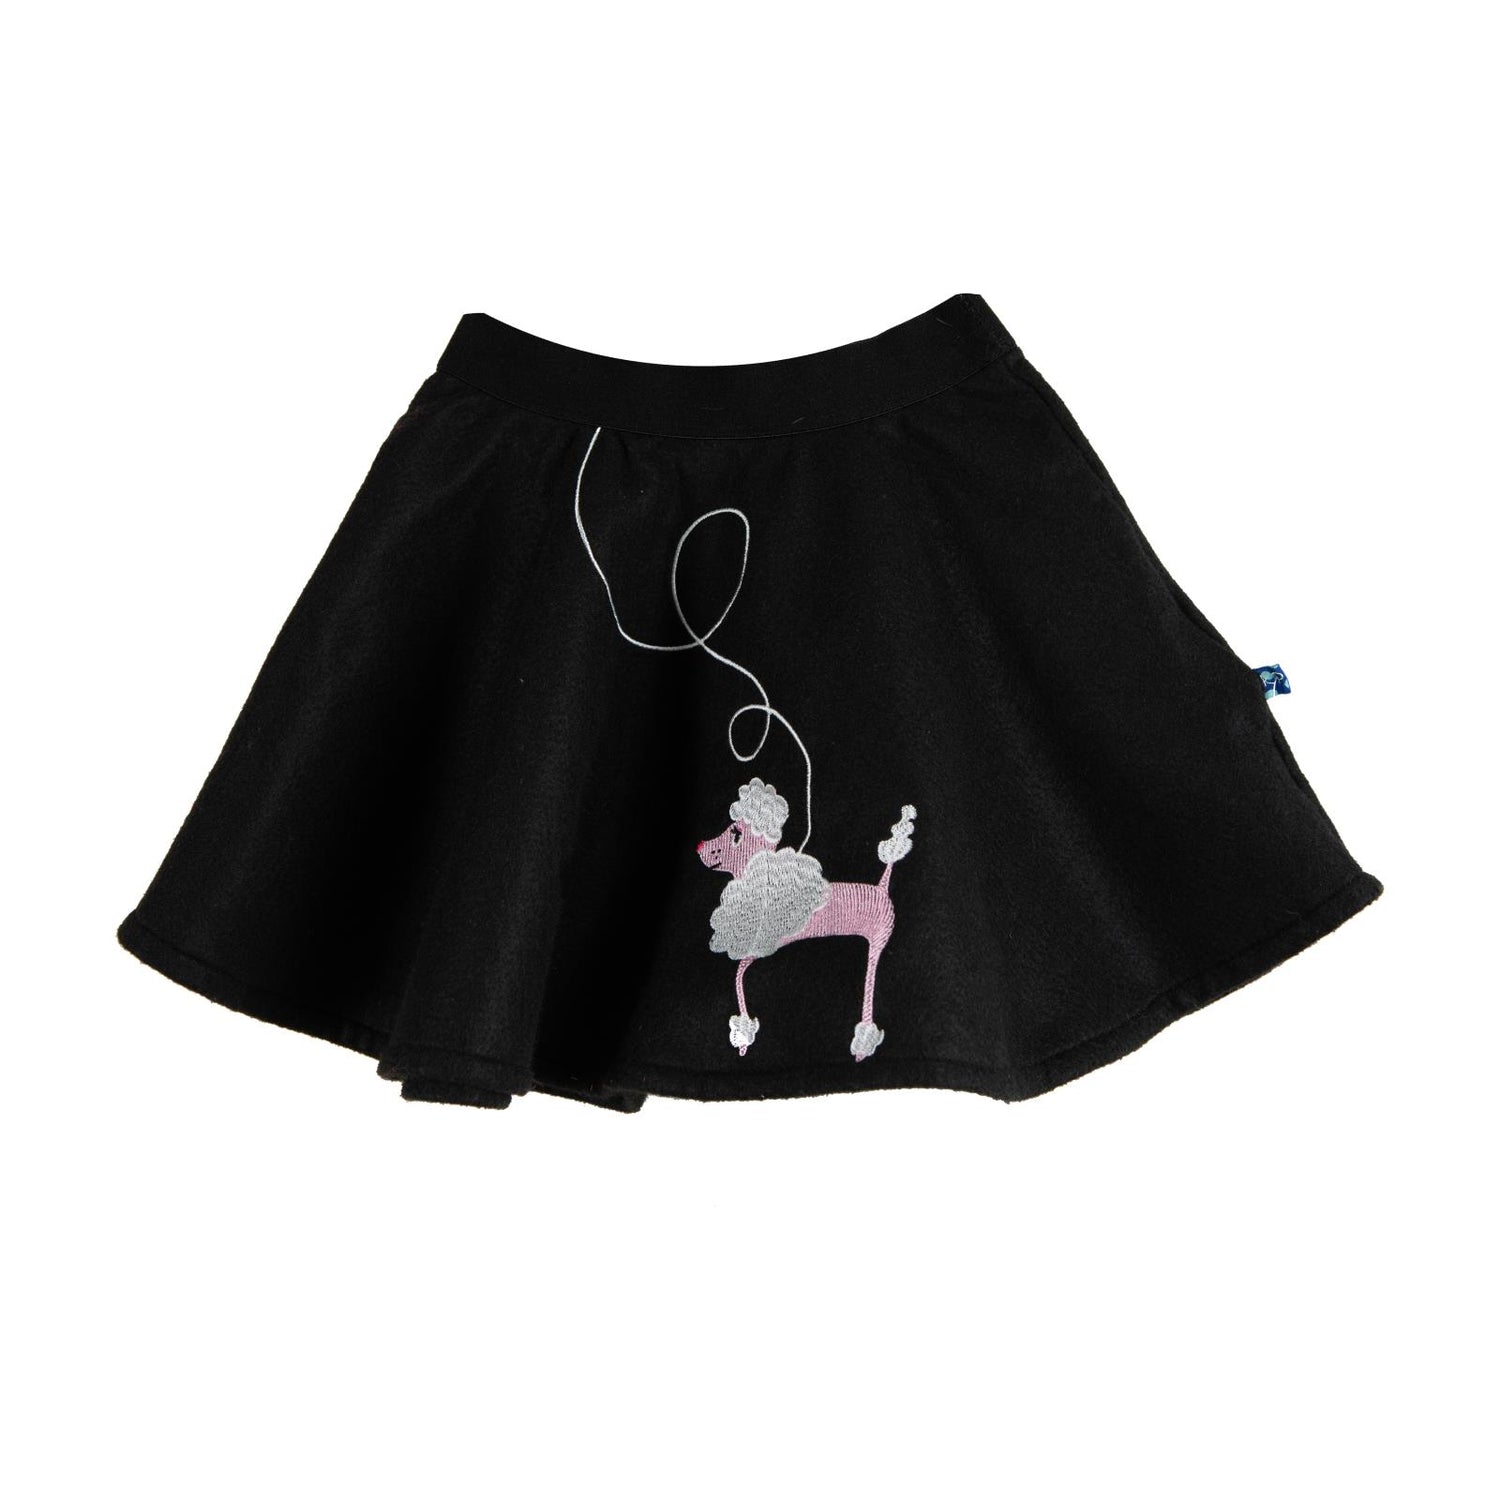 Felt Poodle Skirt with Applique in Midnight Poodle